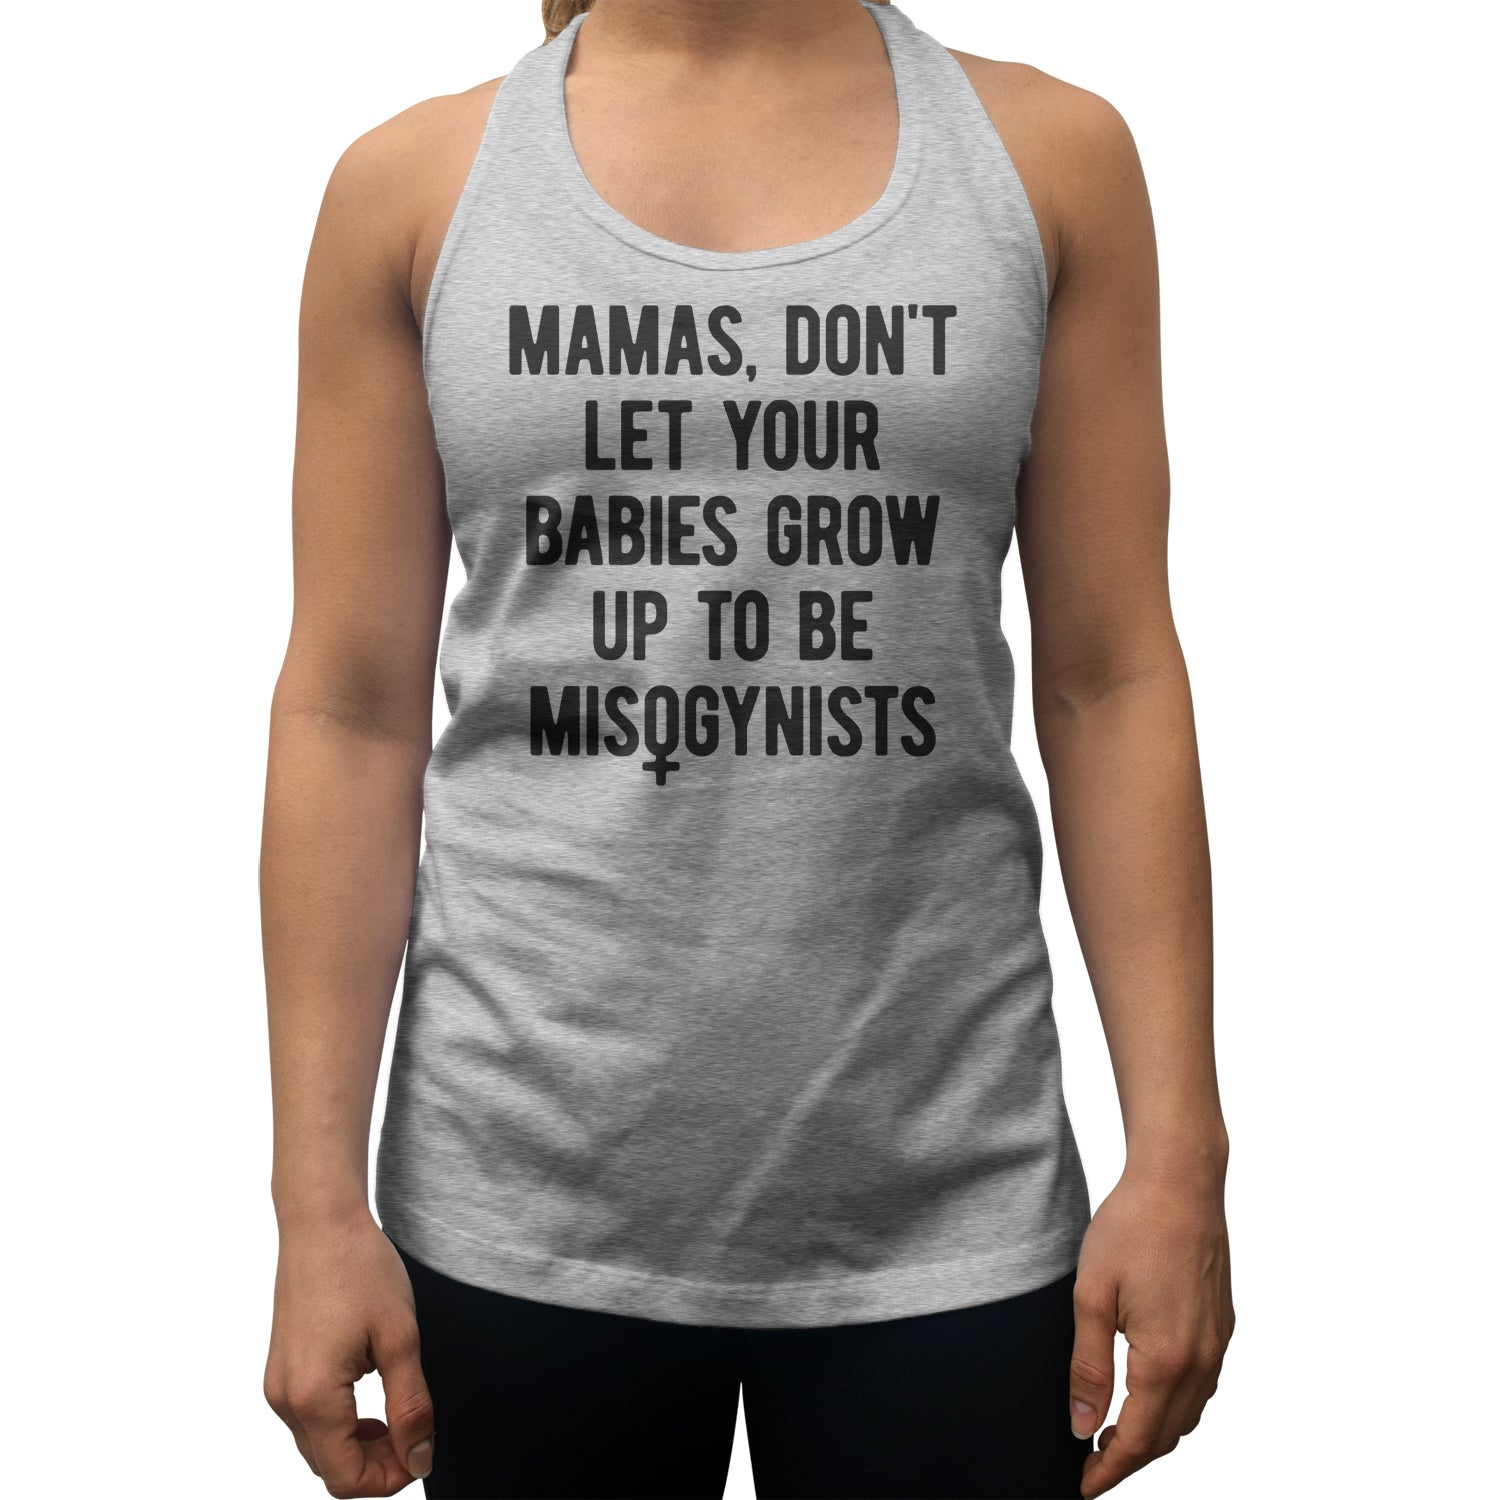 Women's Mamas Don't Let Your Babies Grow Up to be Misogynists Racerback Tank Top